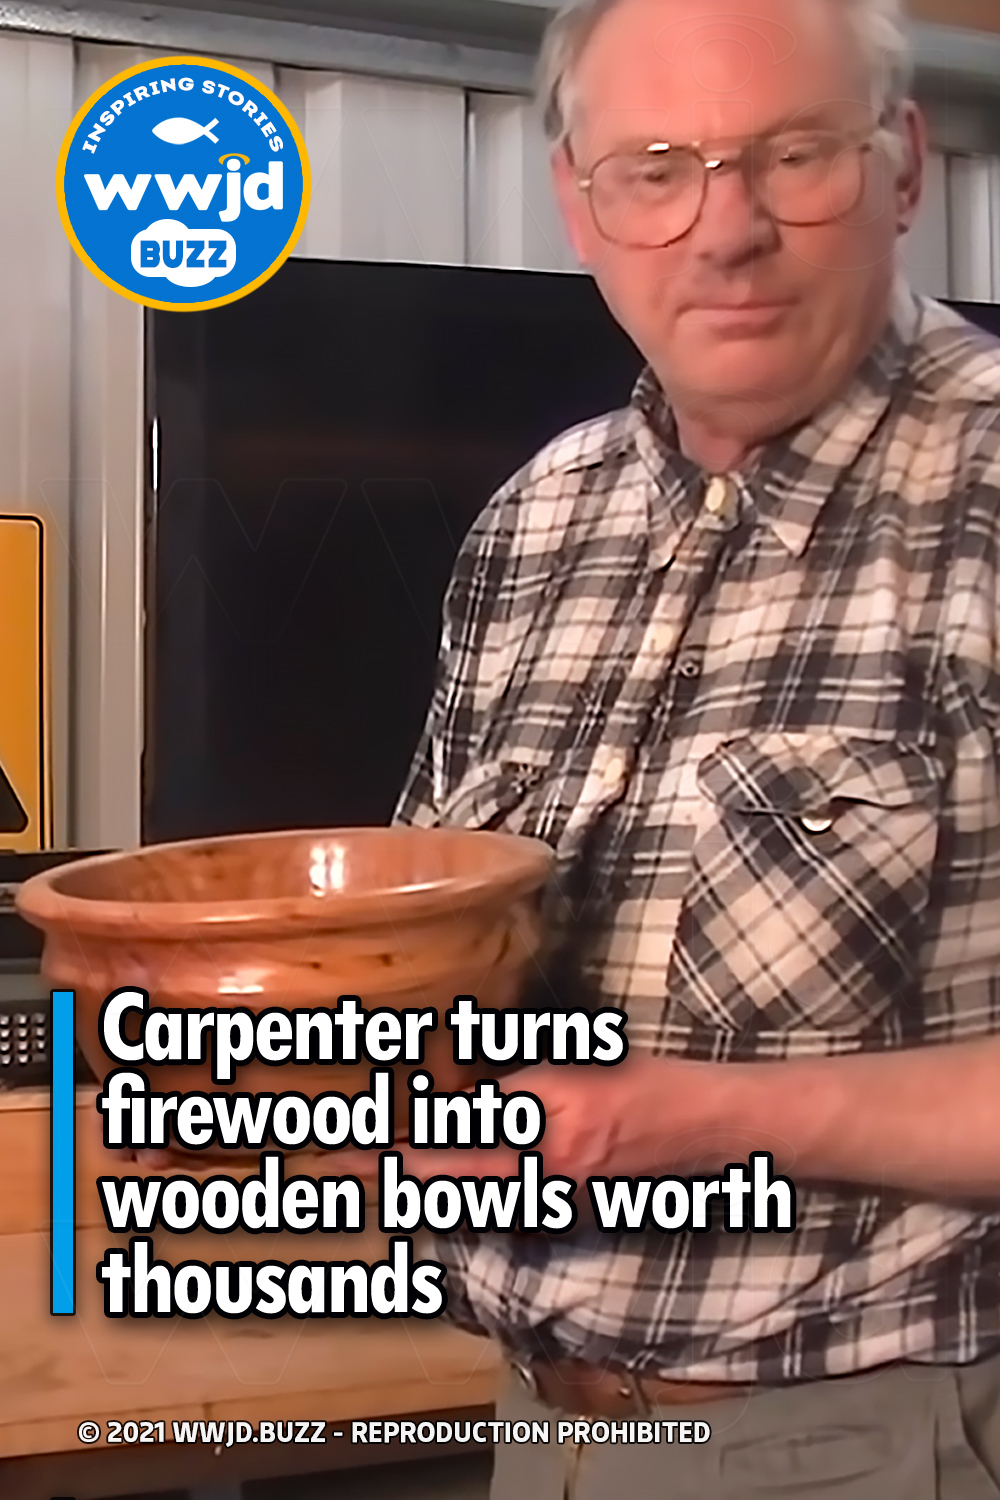 Carpenter turns firewood into wooden bowls worth thousands